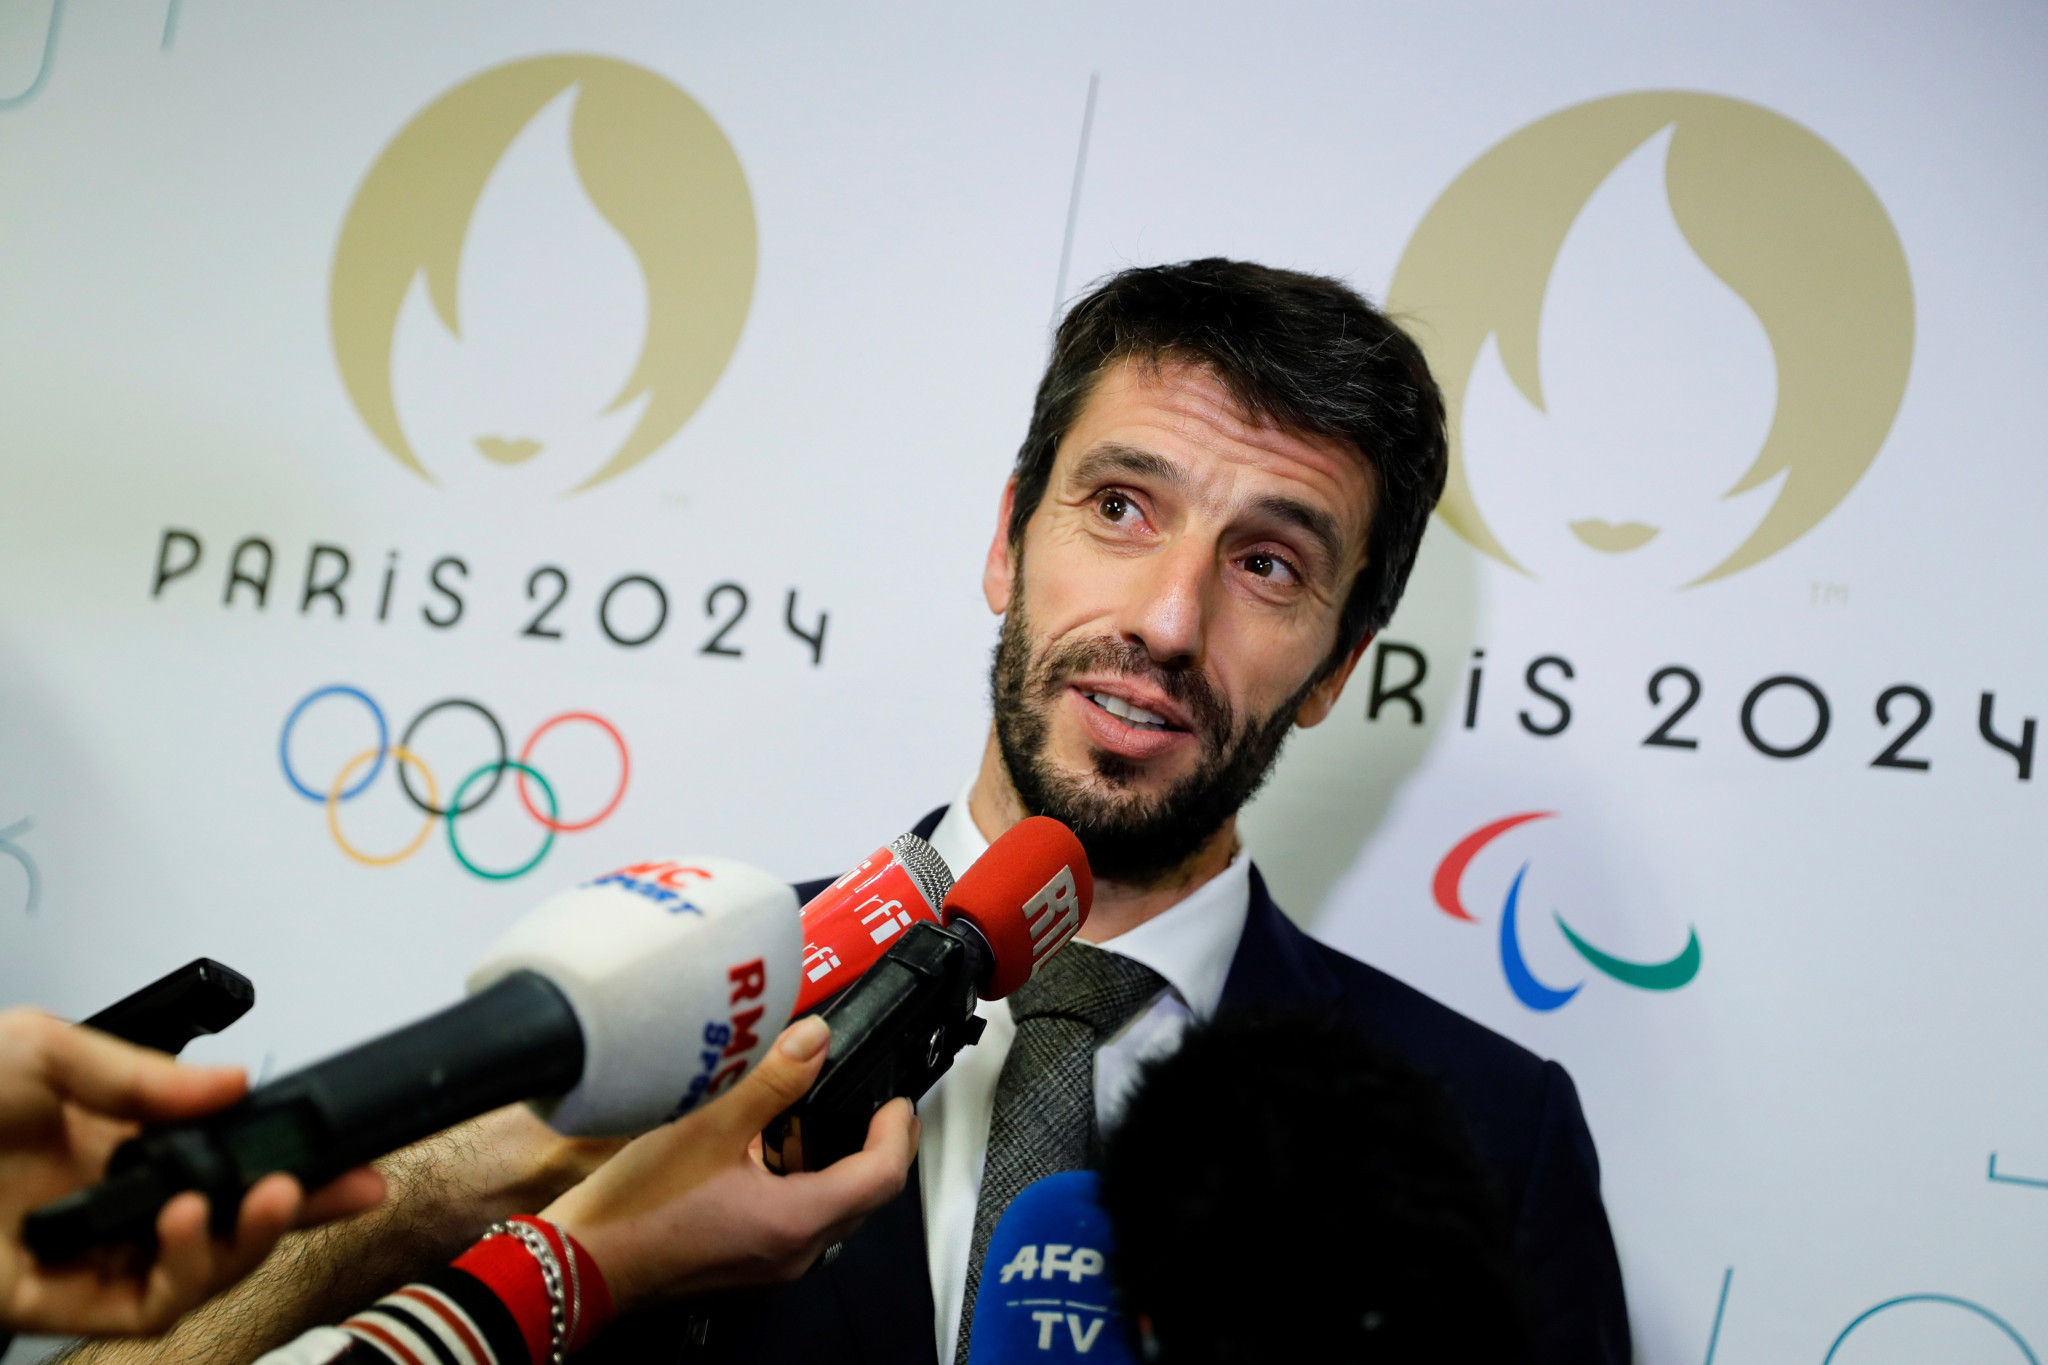 France will lose its representative on the IOC Athletes' Commission when Paris 2024 President Tony Estanguet's eight-year term concludes later this year, with Martin Fourcade set to replace him ©Getty Images